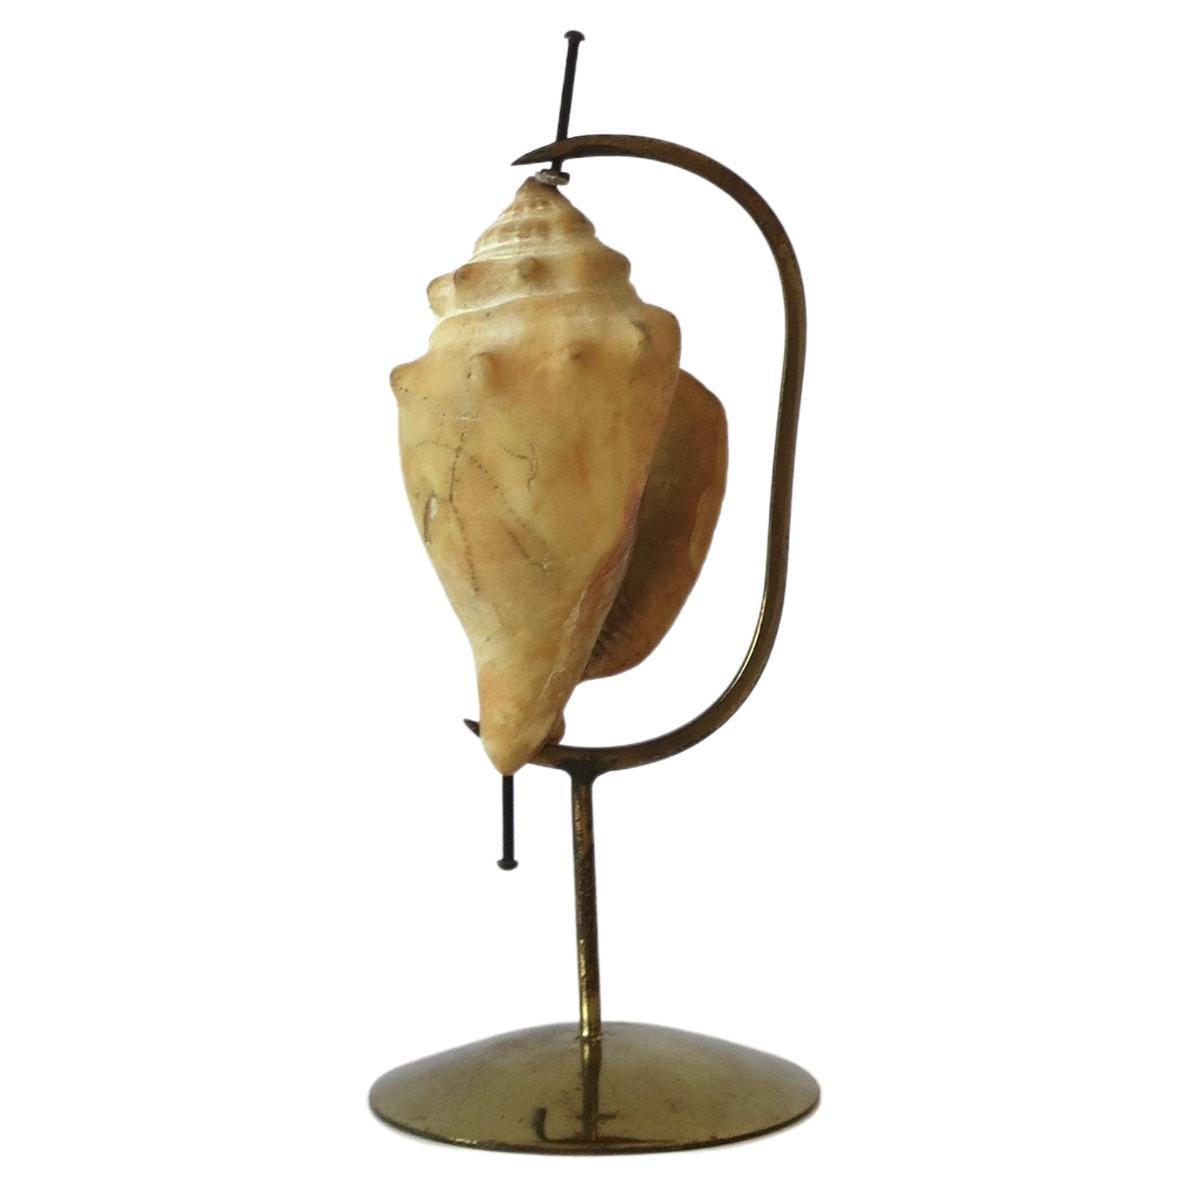 Marguerite Stix Designed Natural Seashell and Brass Object, circa 1960s For Sale